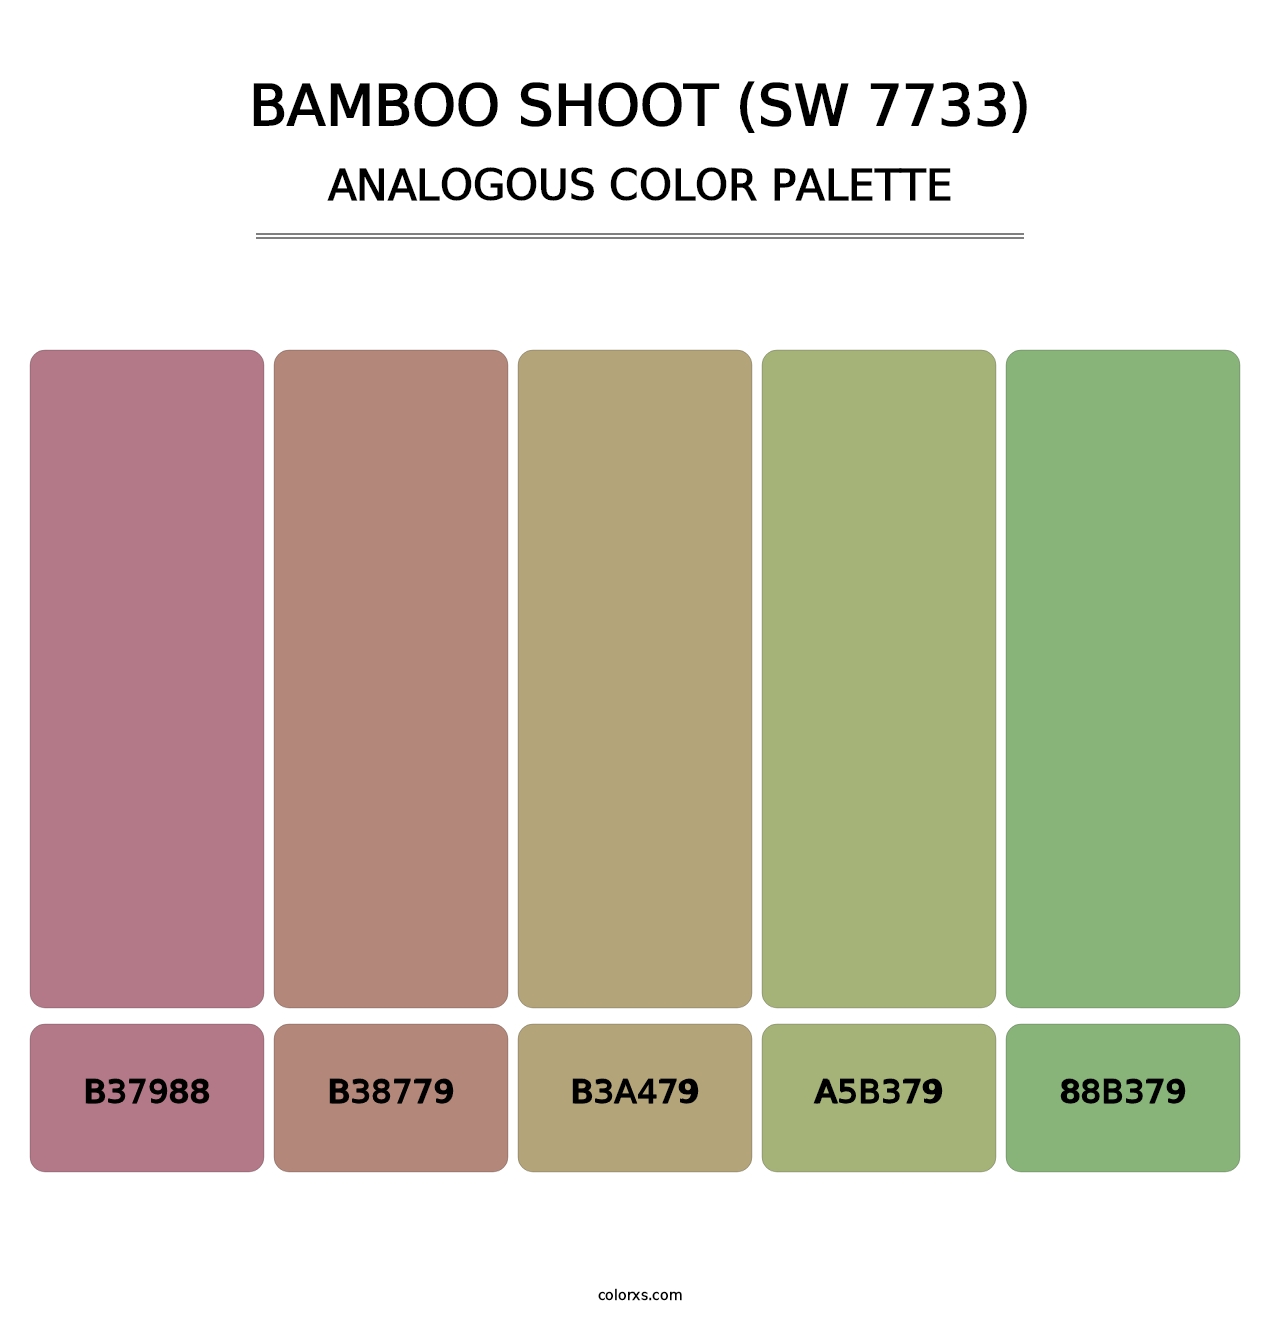 Bamboo Shoot (SW 7733) - Analogous Color Palette